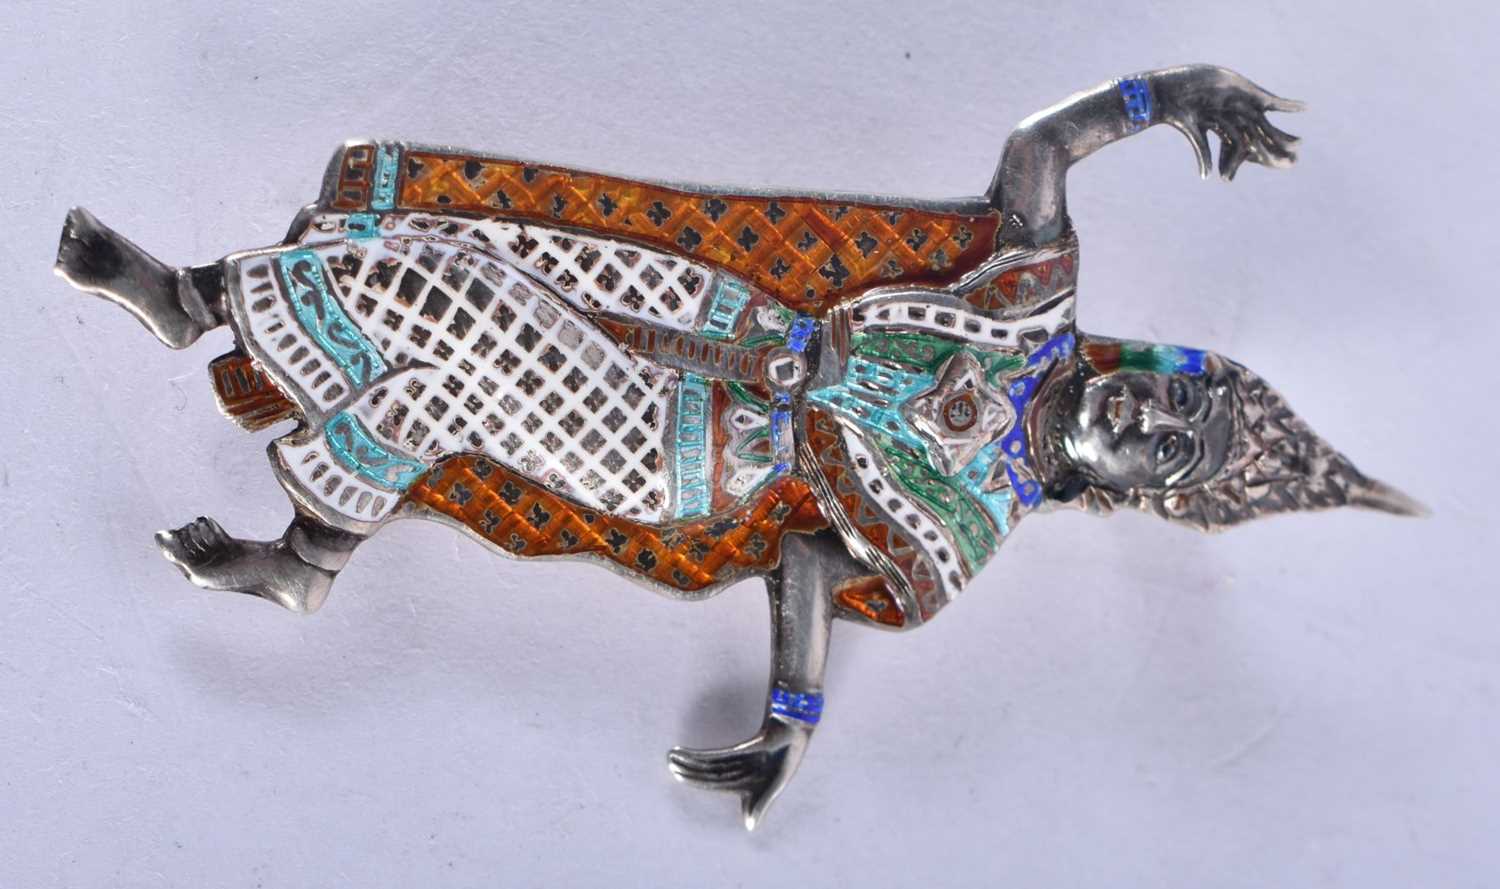 A South East Asian Silver and Enamel Brooch. Stamped Siam Silver, 6.3 cm x 3.5 cm, weight 8g